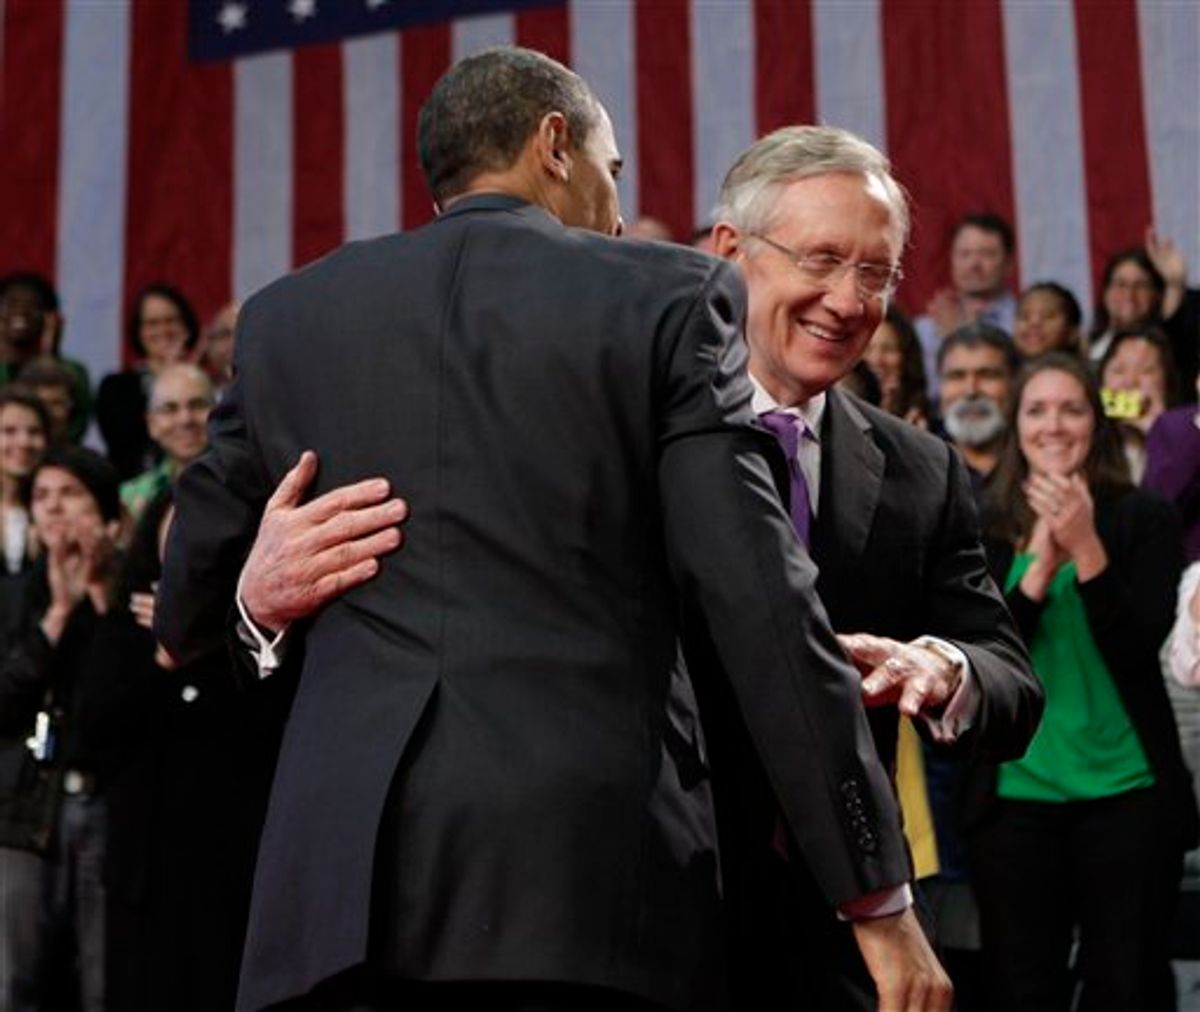 President Barack Obama embraces Senate Majority Leader Harry Reid of Nev. during a town hall meeting at Green Valley High School in Henderson, Nev., Friday, Feb. 19, 2010. (AP Photo/Pablo Martinez Monsivais)     (AP)